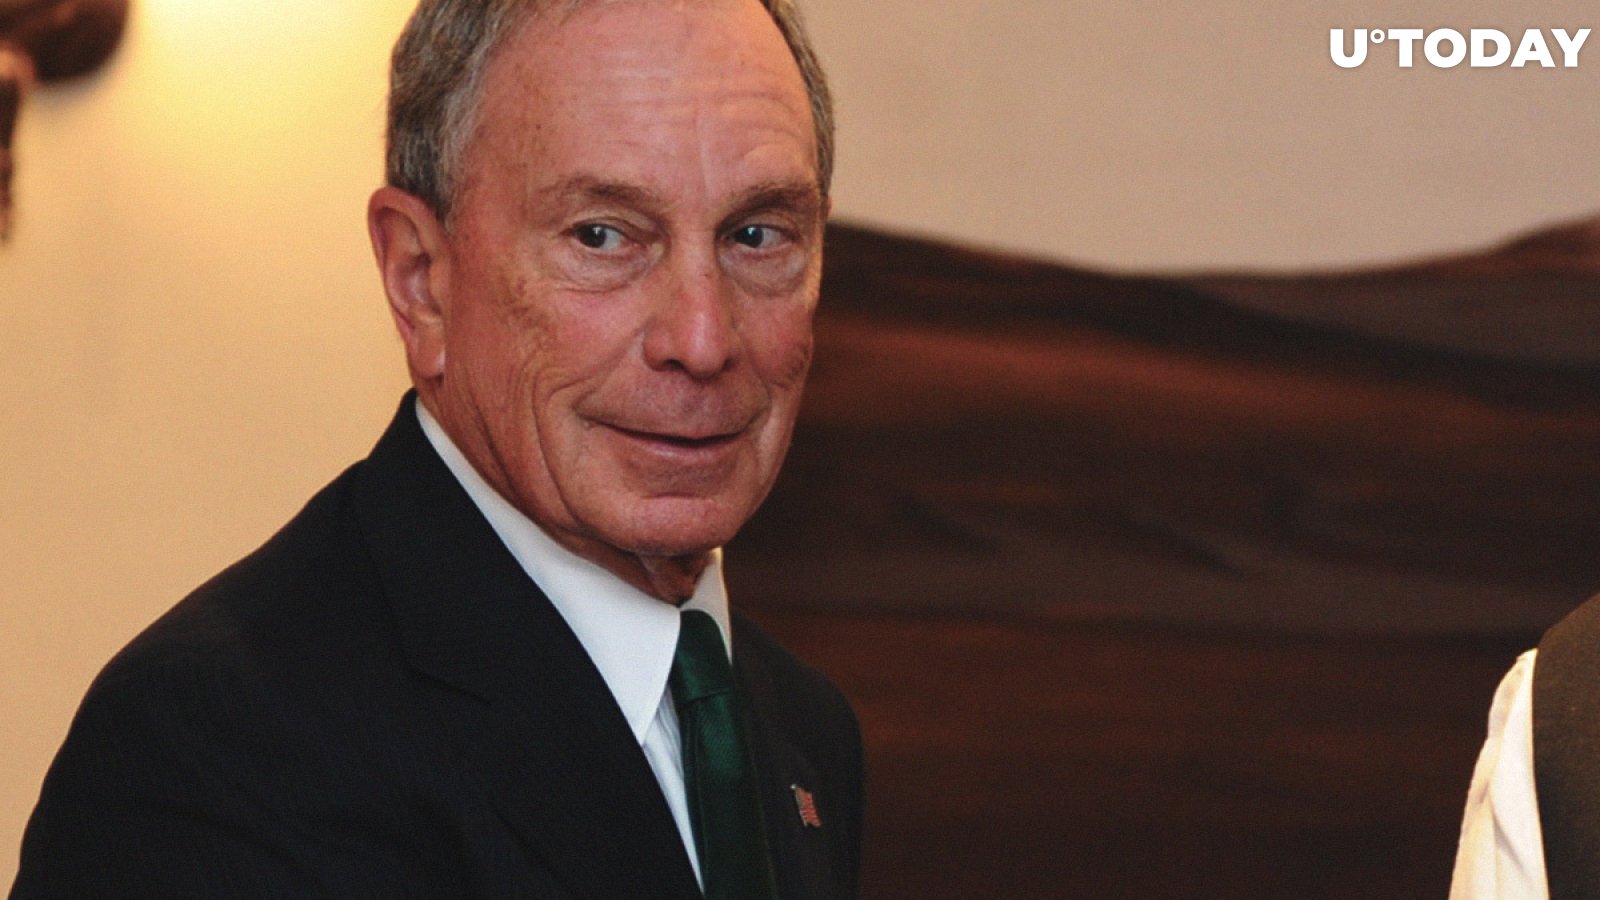 Pro-Bitcoin (BTC) Candidate Mike Bloomberg Ends His $700 Mln Presidential Bid 